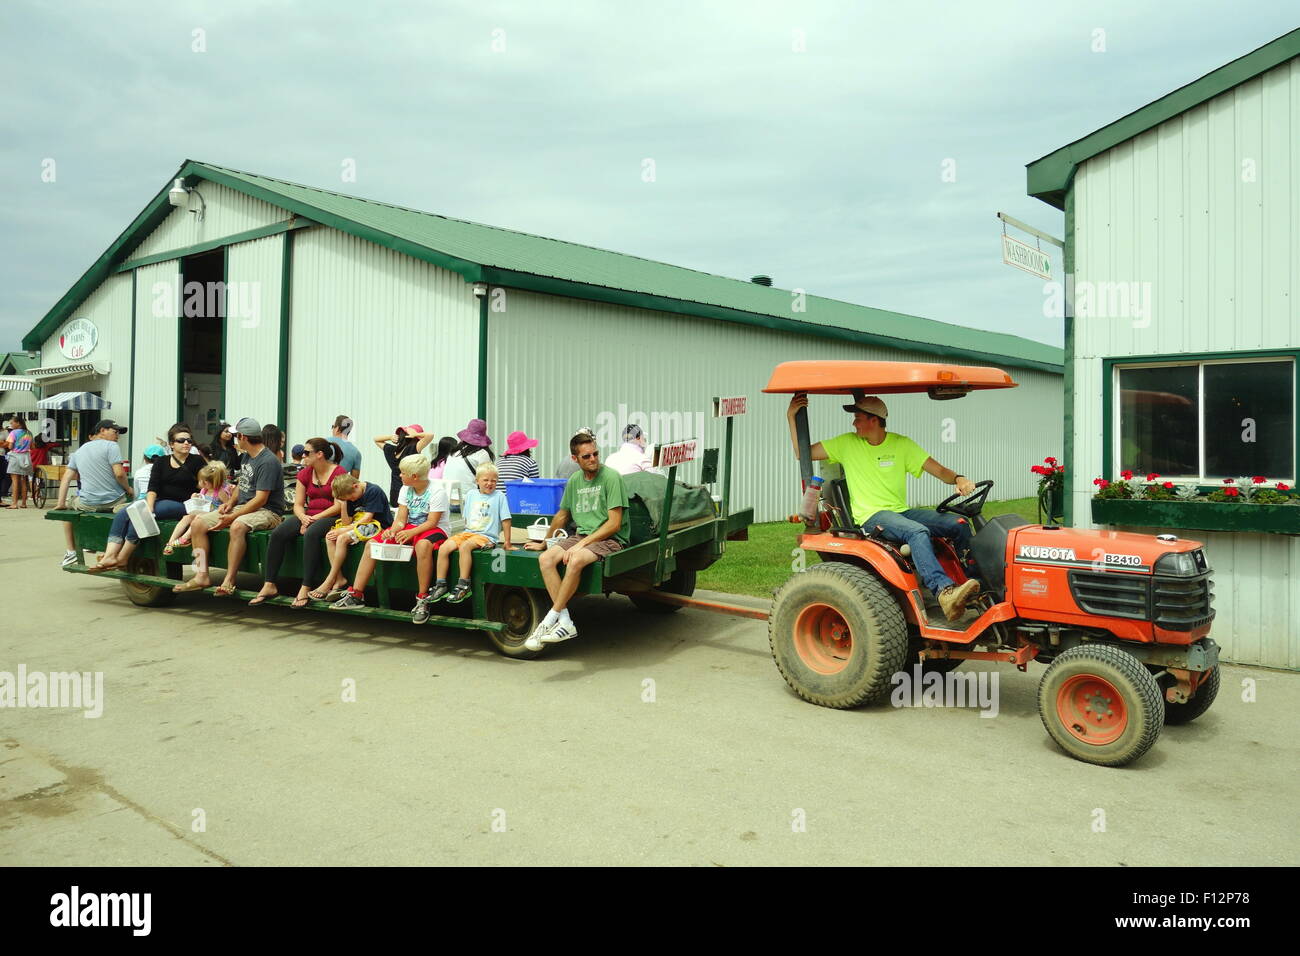 Tractor pulling visitors at a farm in Ontario, Canada Stock Photo